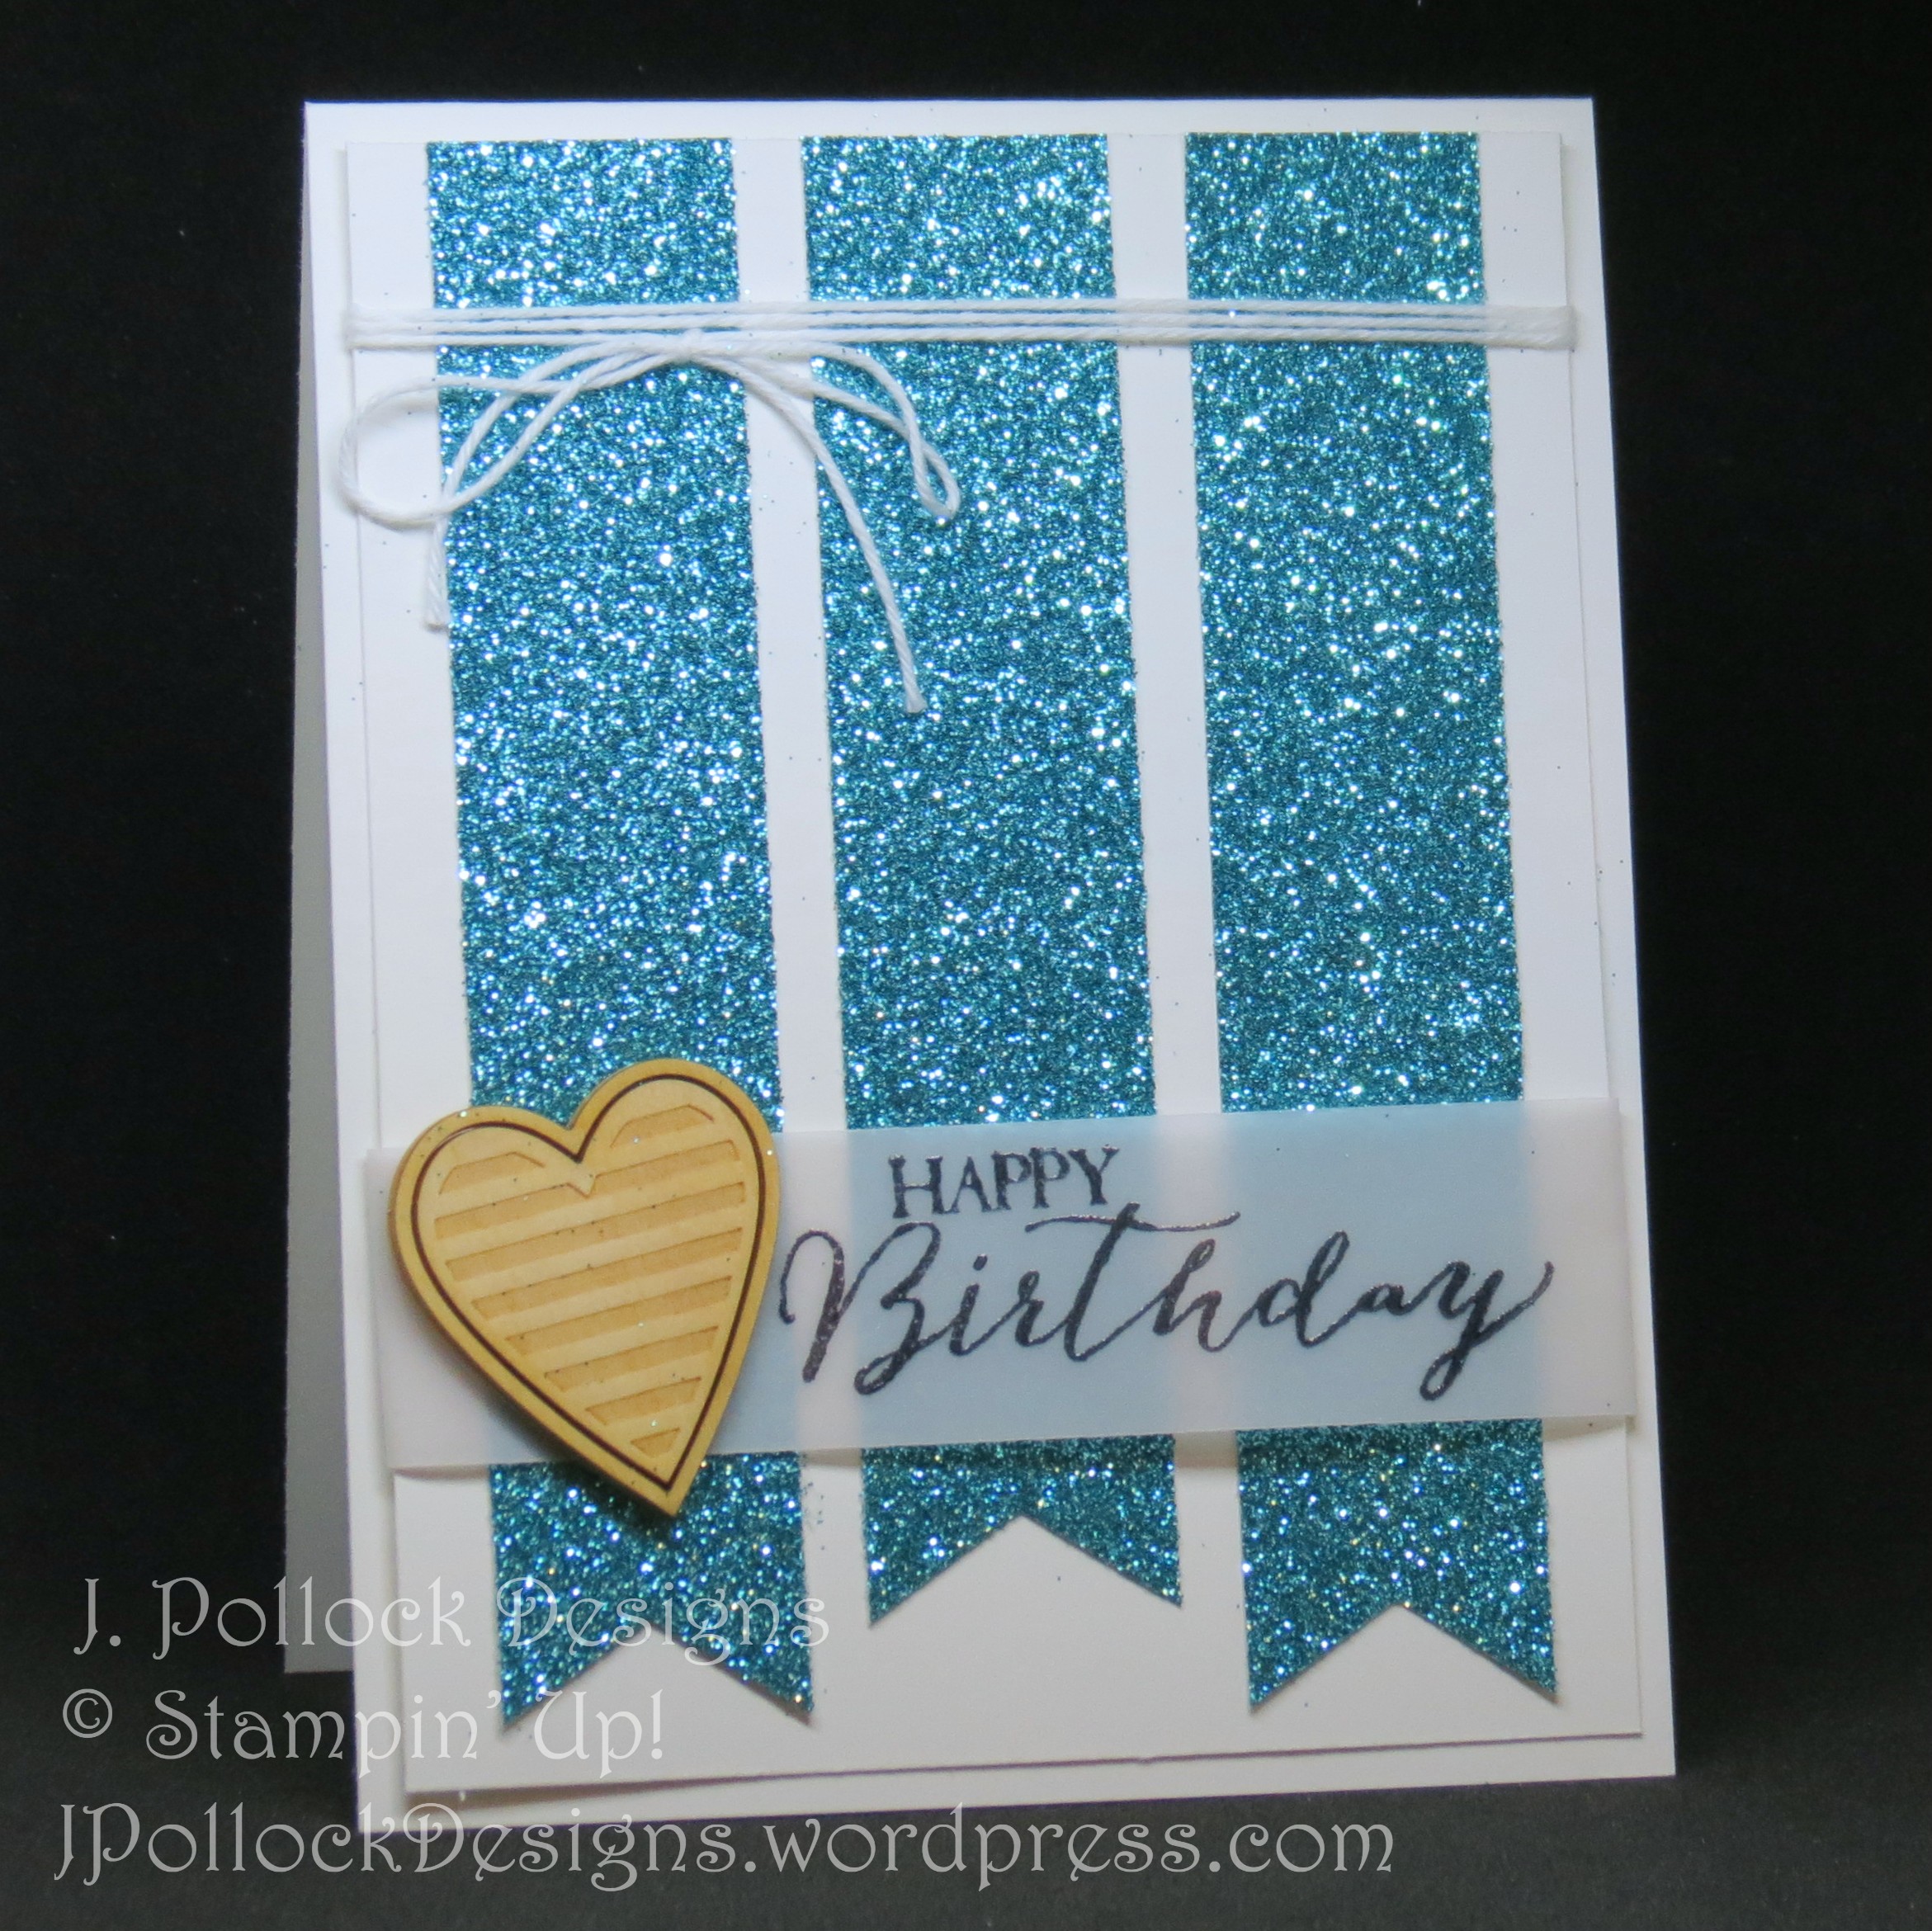 J. Pollock Designs - Stampin' Up! - Butterfly Basics, Myths & Magic Glimmer Paper